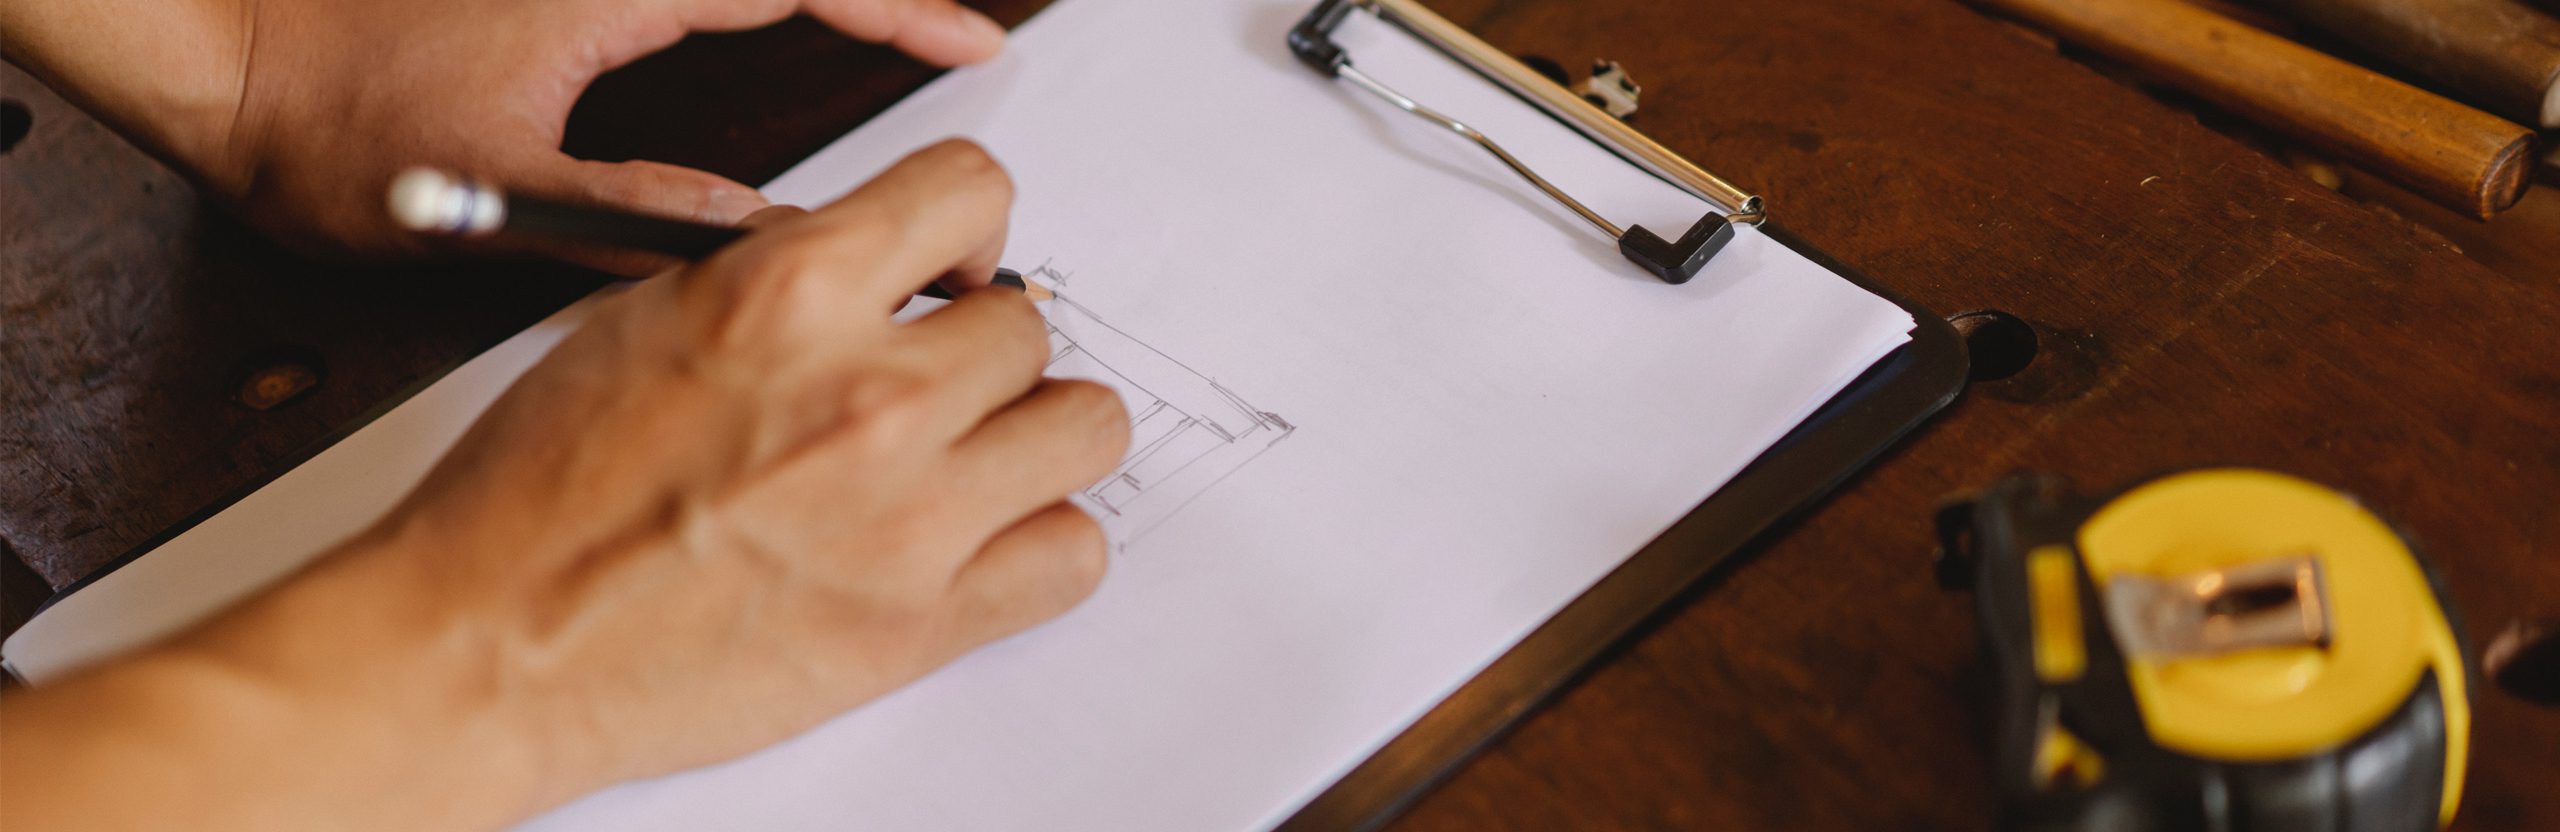 A close-up of a person’s hand drawing a diagram on a clipboard. There is a tape measure on the right-hand side of the table.